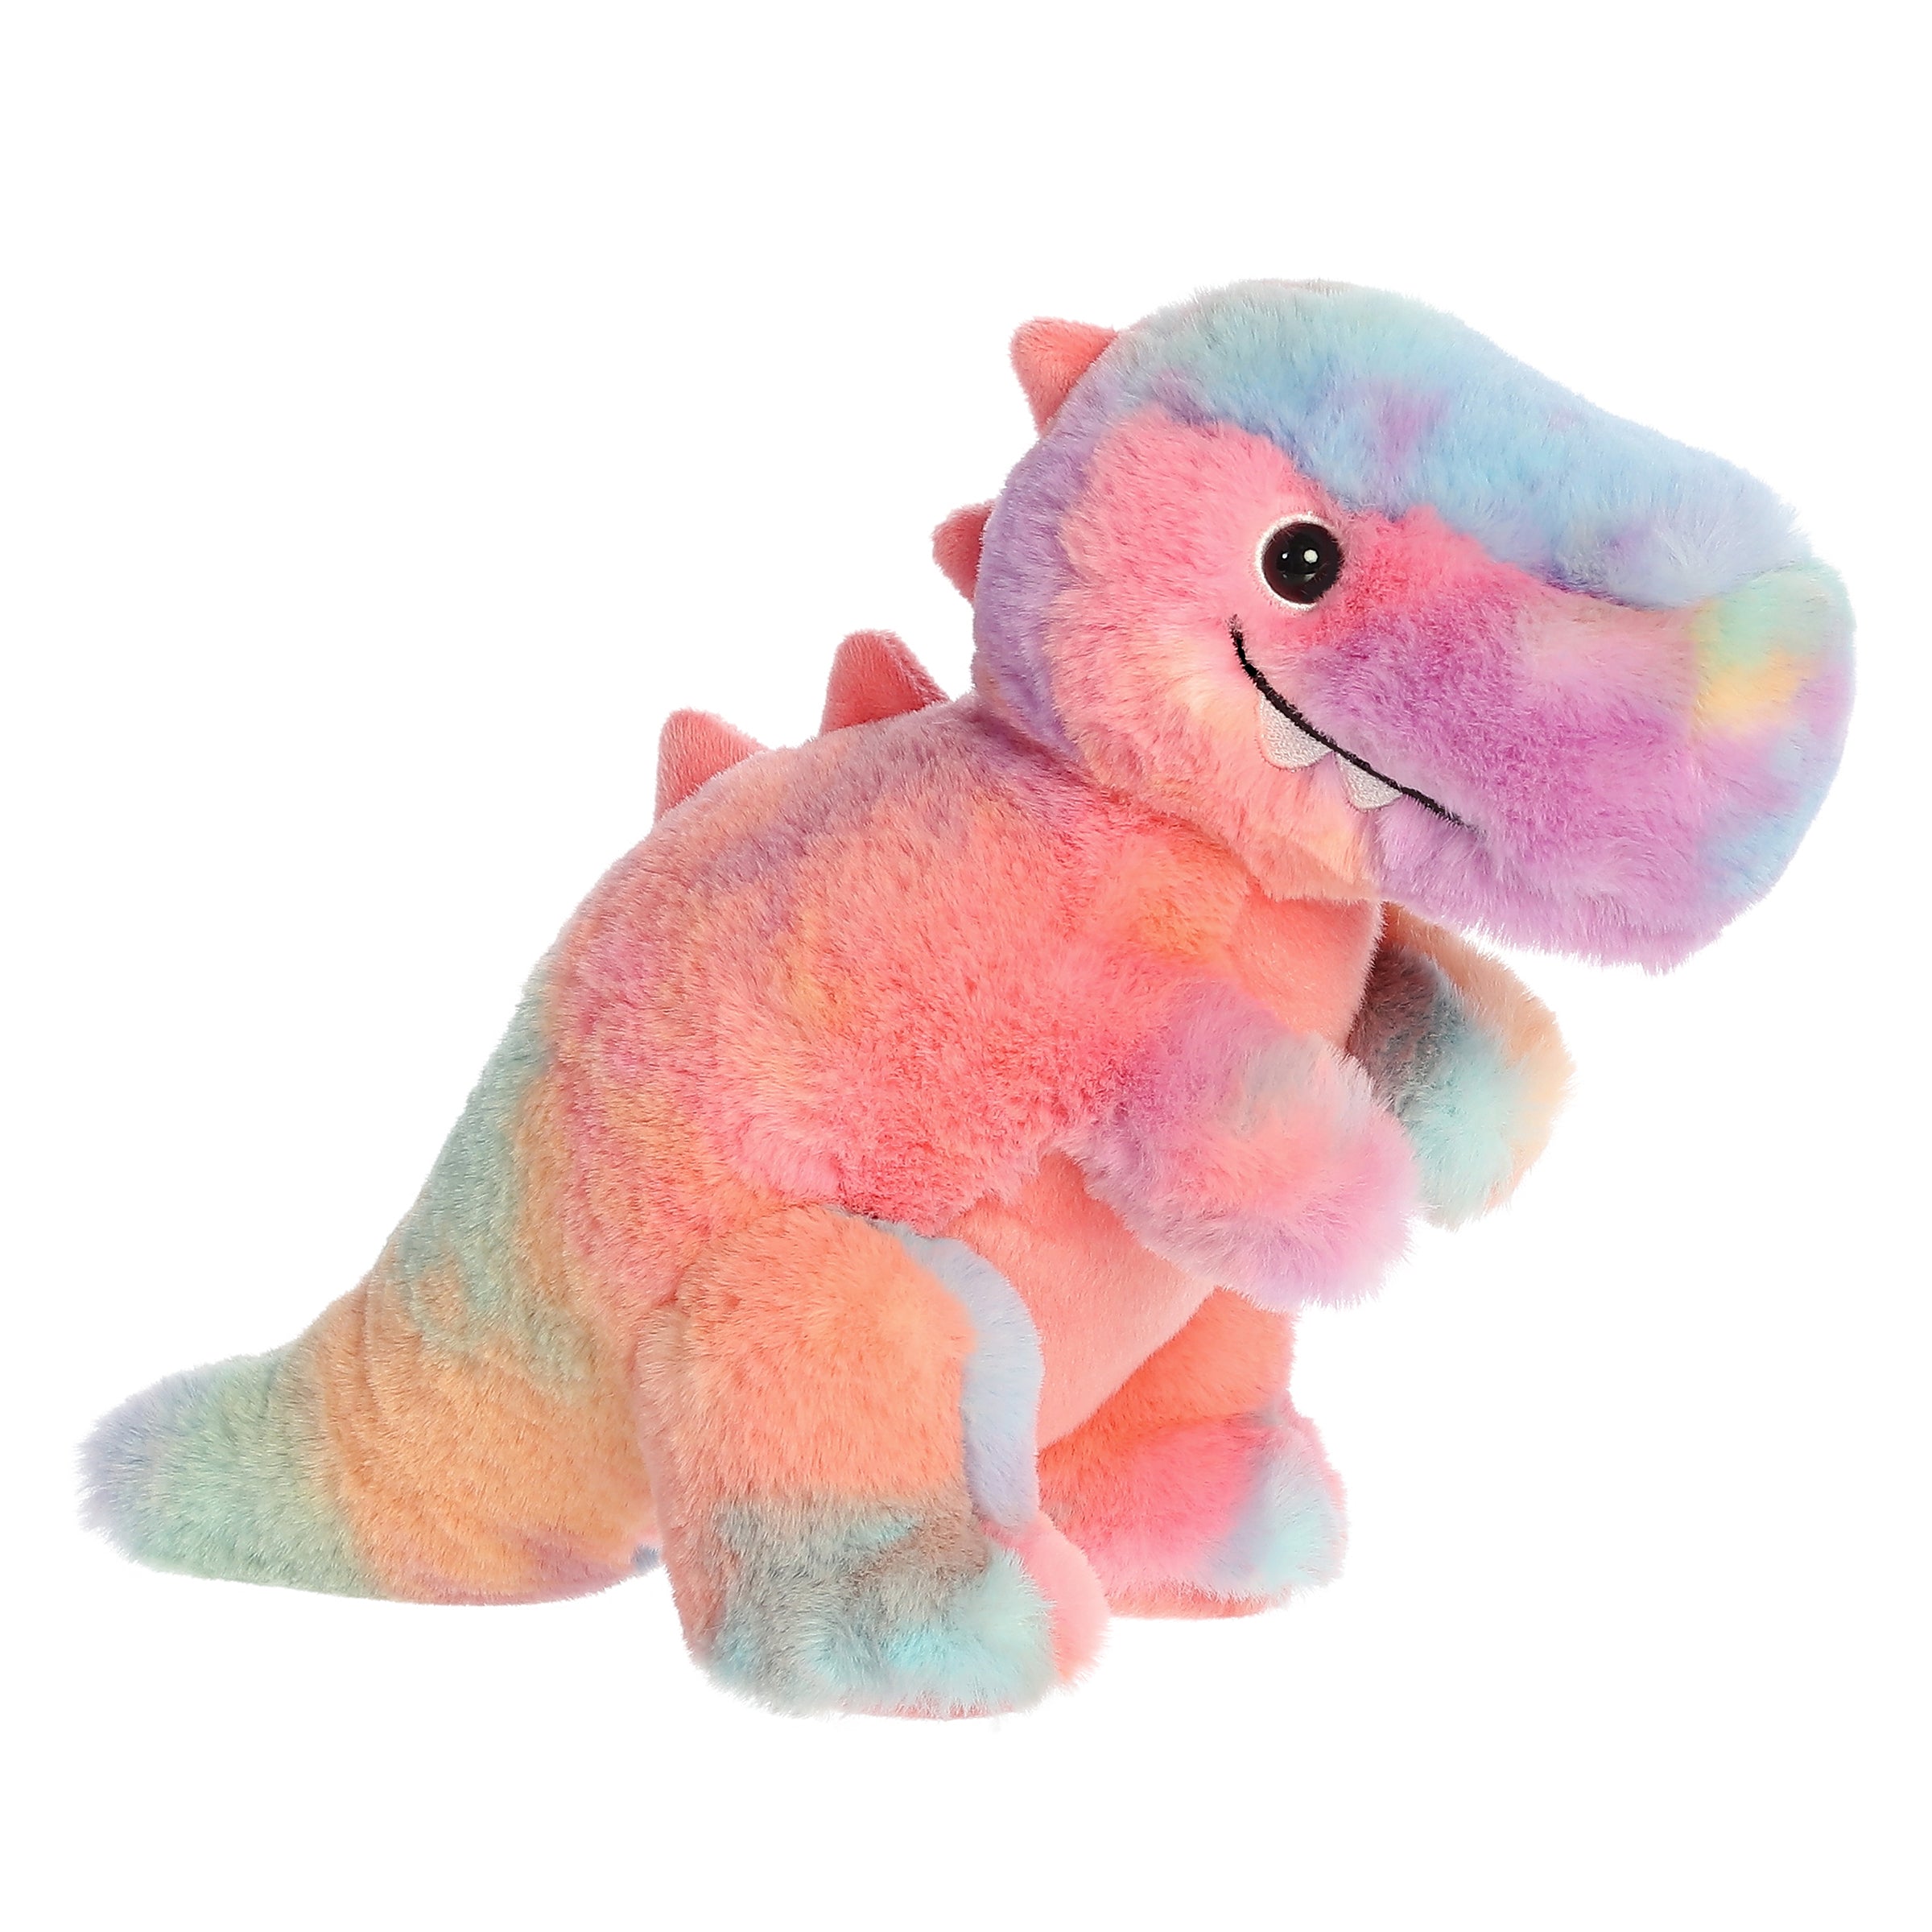 A multicolored T-Rex dino plush, adorned in a dynamic watercolor rainbow pattern and an adorable grin with two teeth out